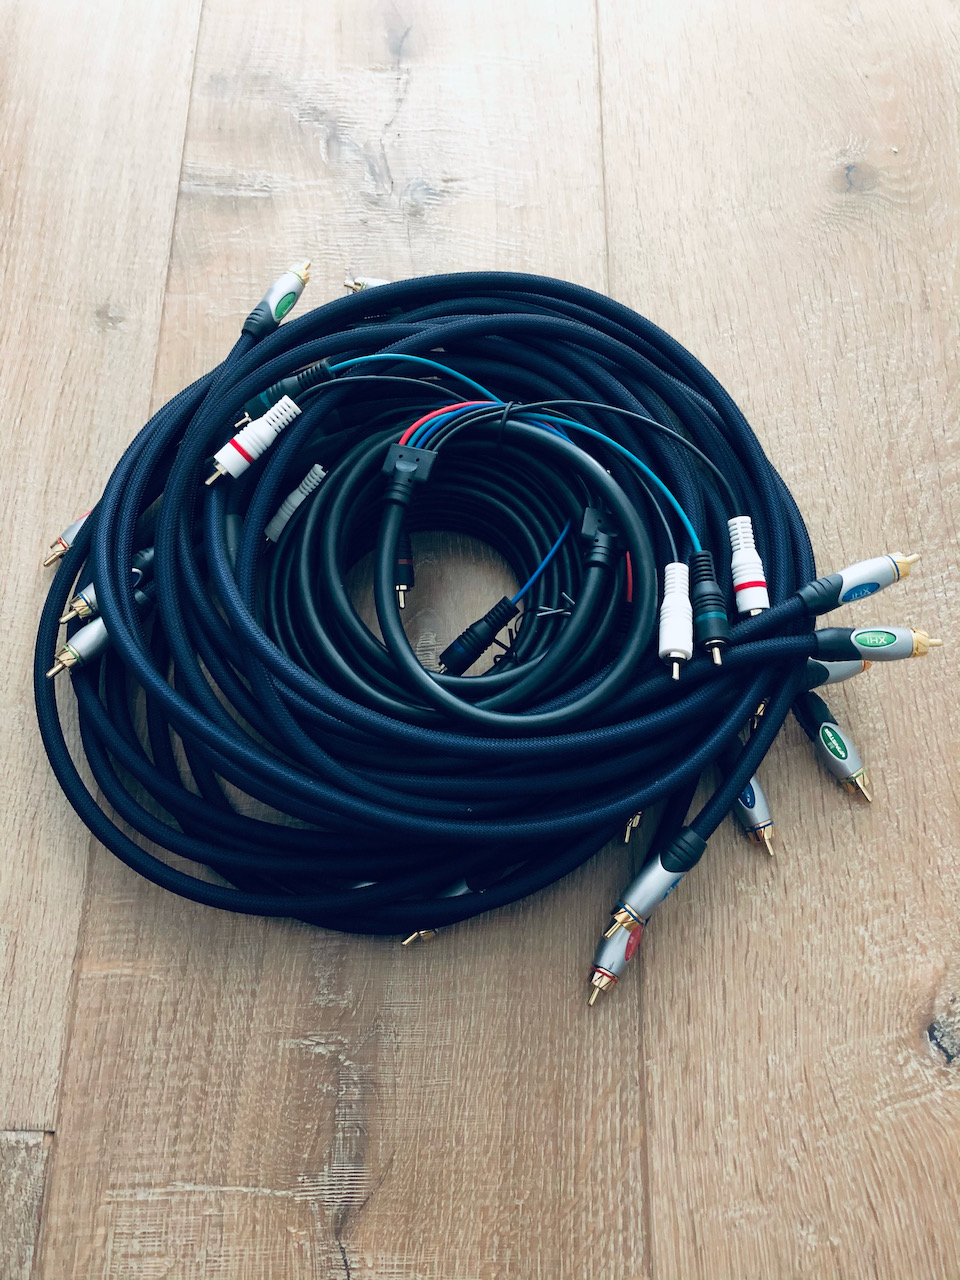 cables.jpeg